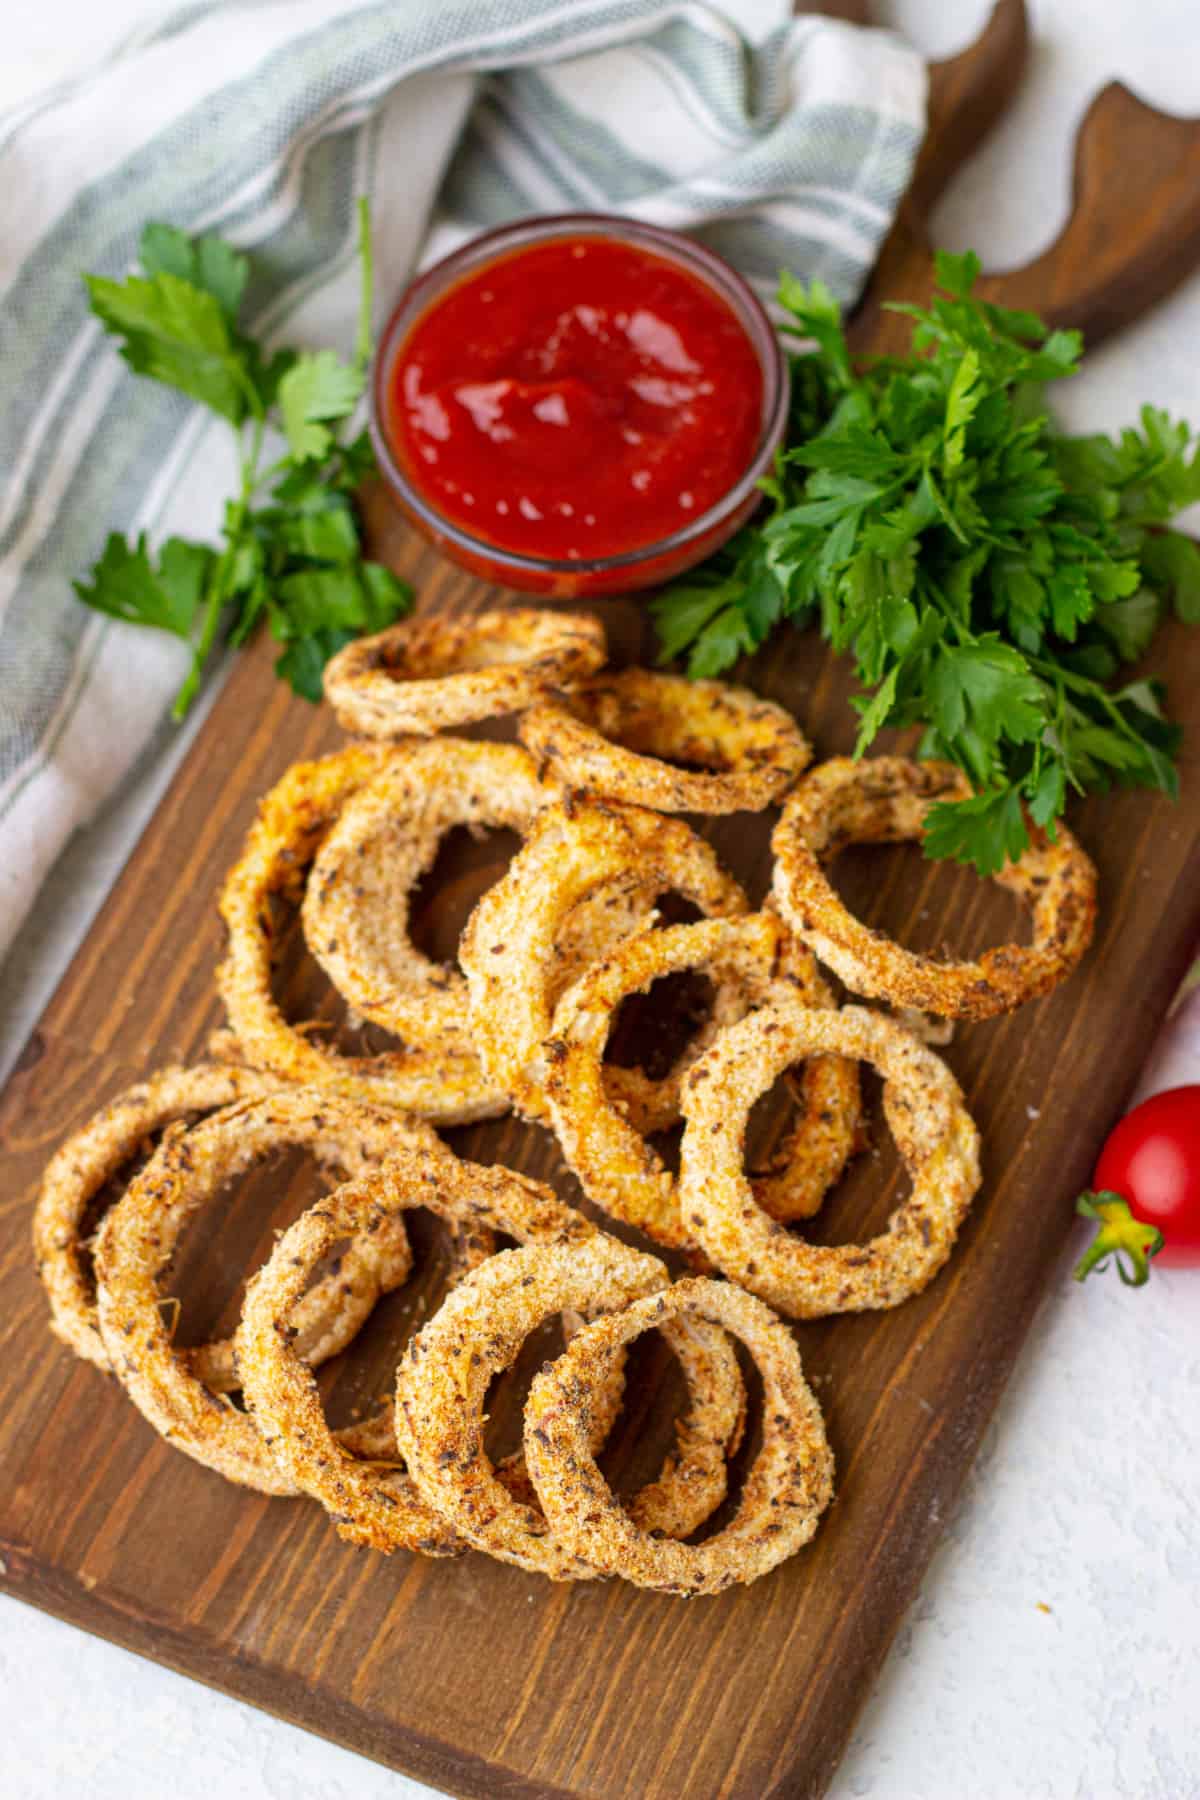 How to make Air Fryer Onion Rings